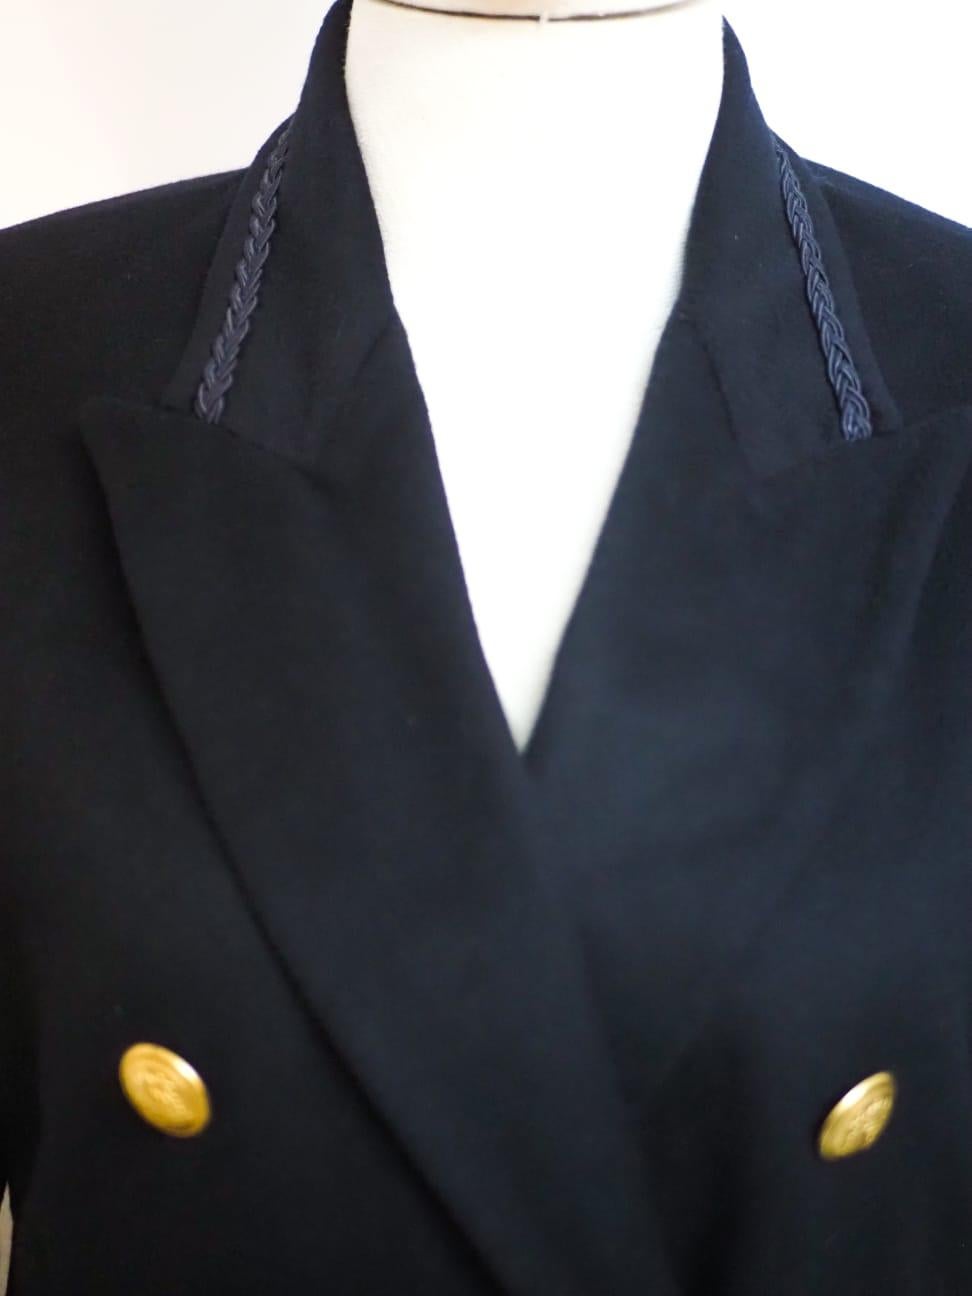 Trussardi jacket
Dark blue jacket embellished with gold tone buttons
totally made in italy
size 44